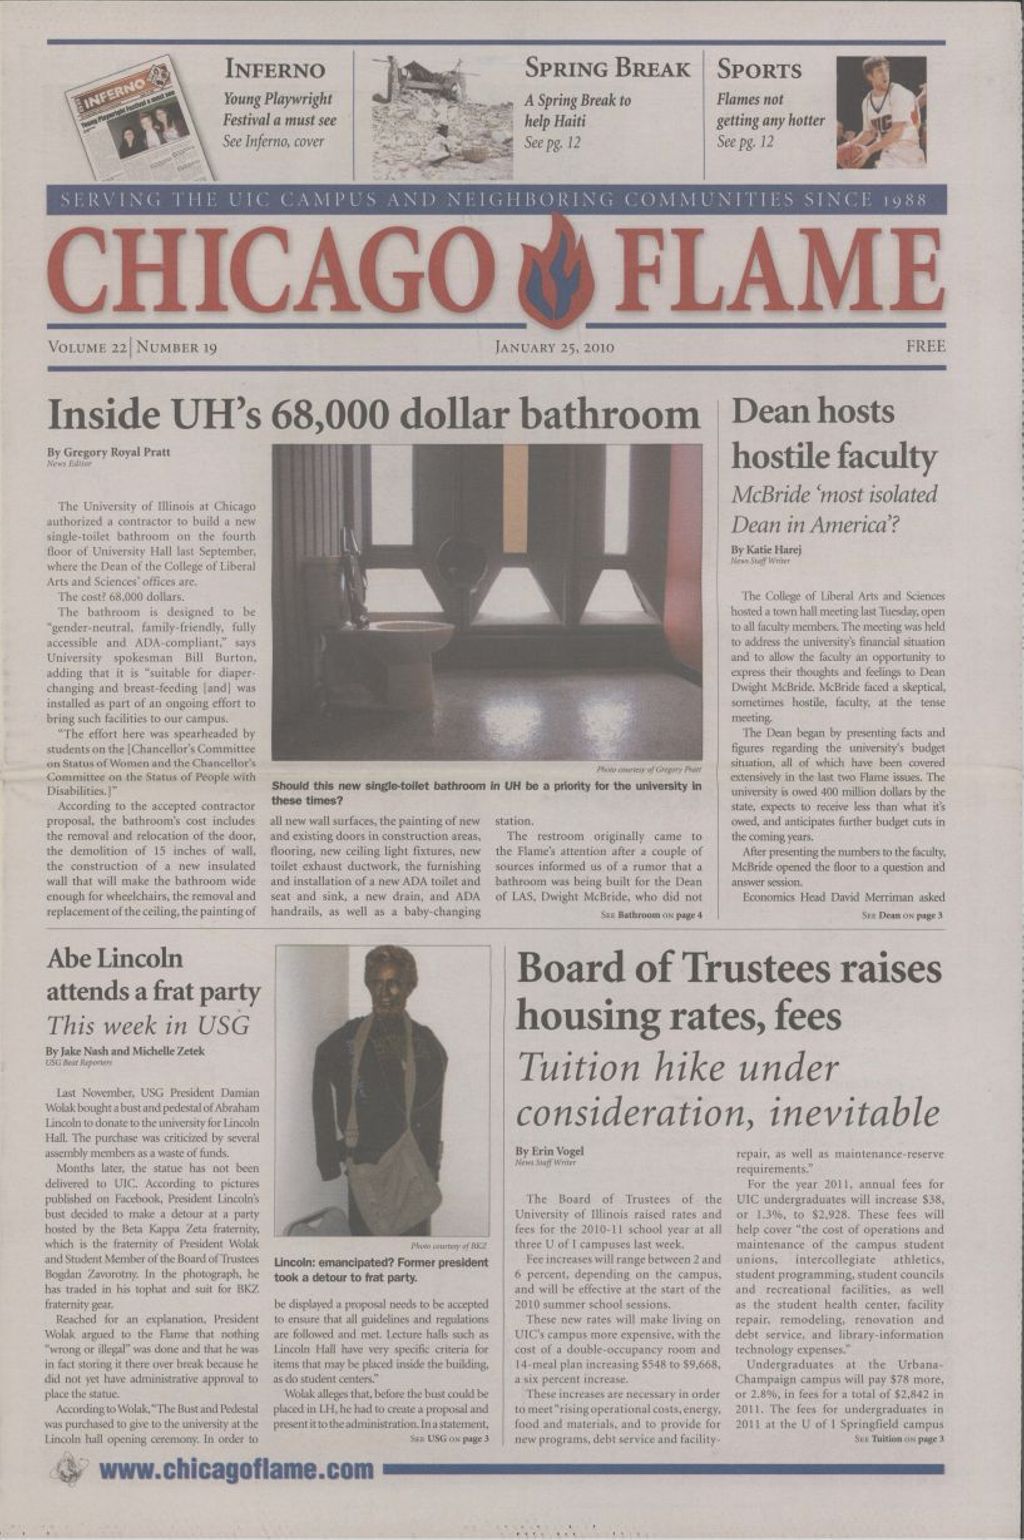 Chicago Flame (January 25, 2010)